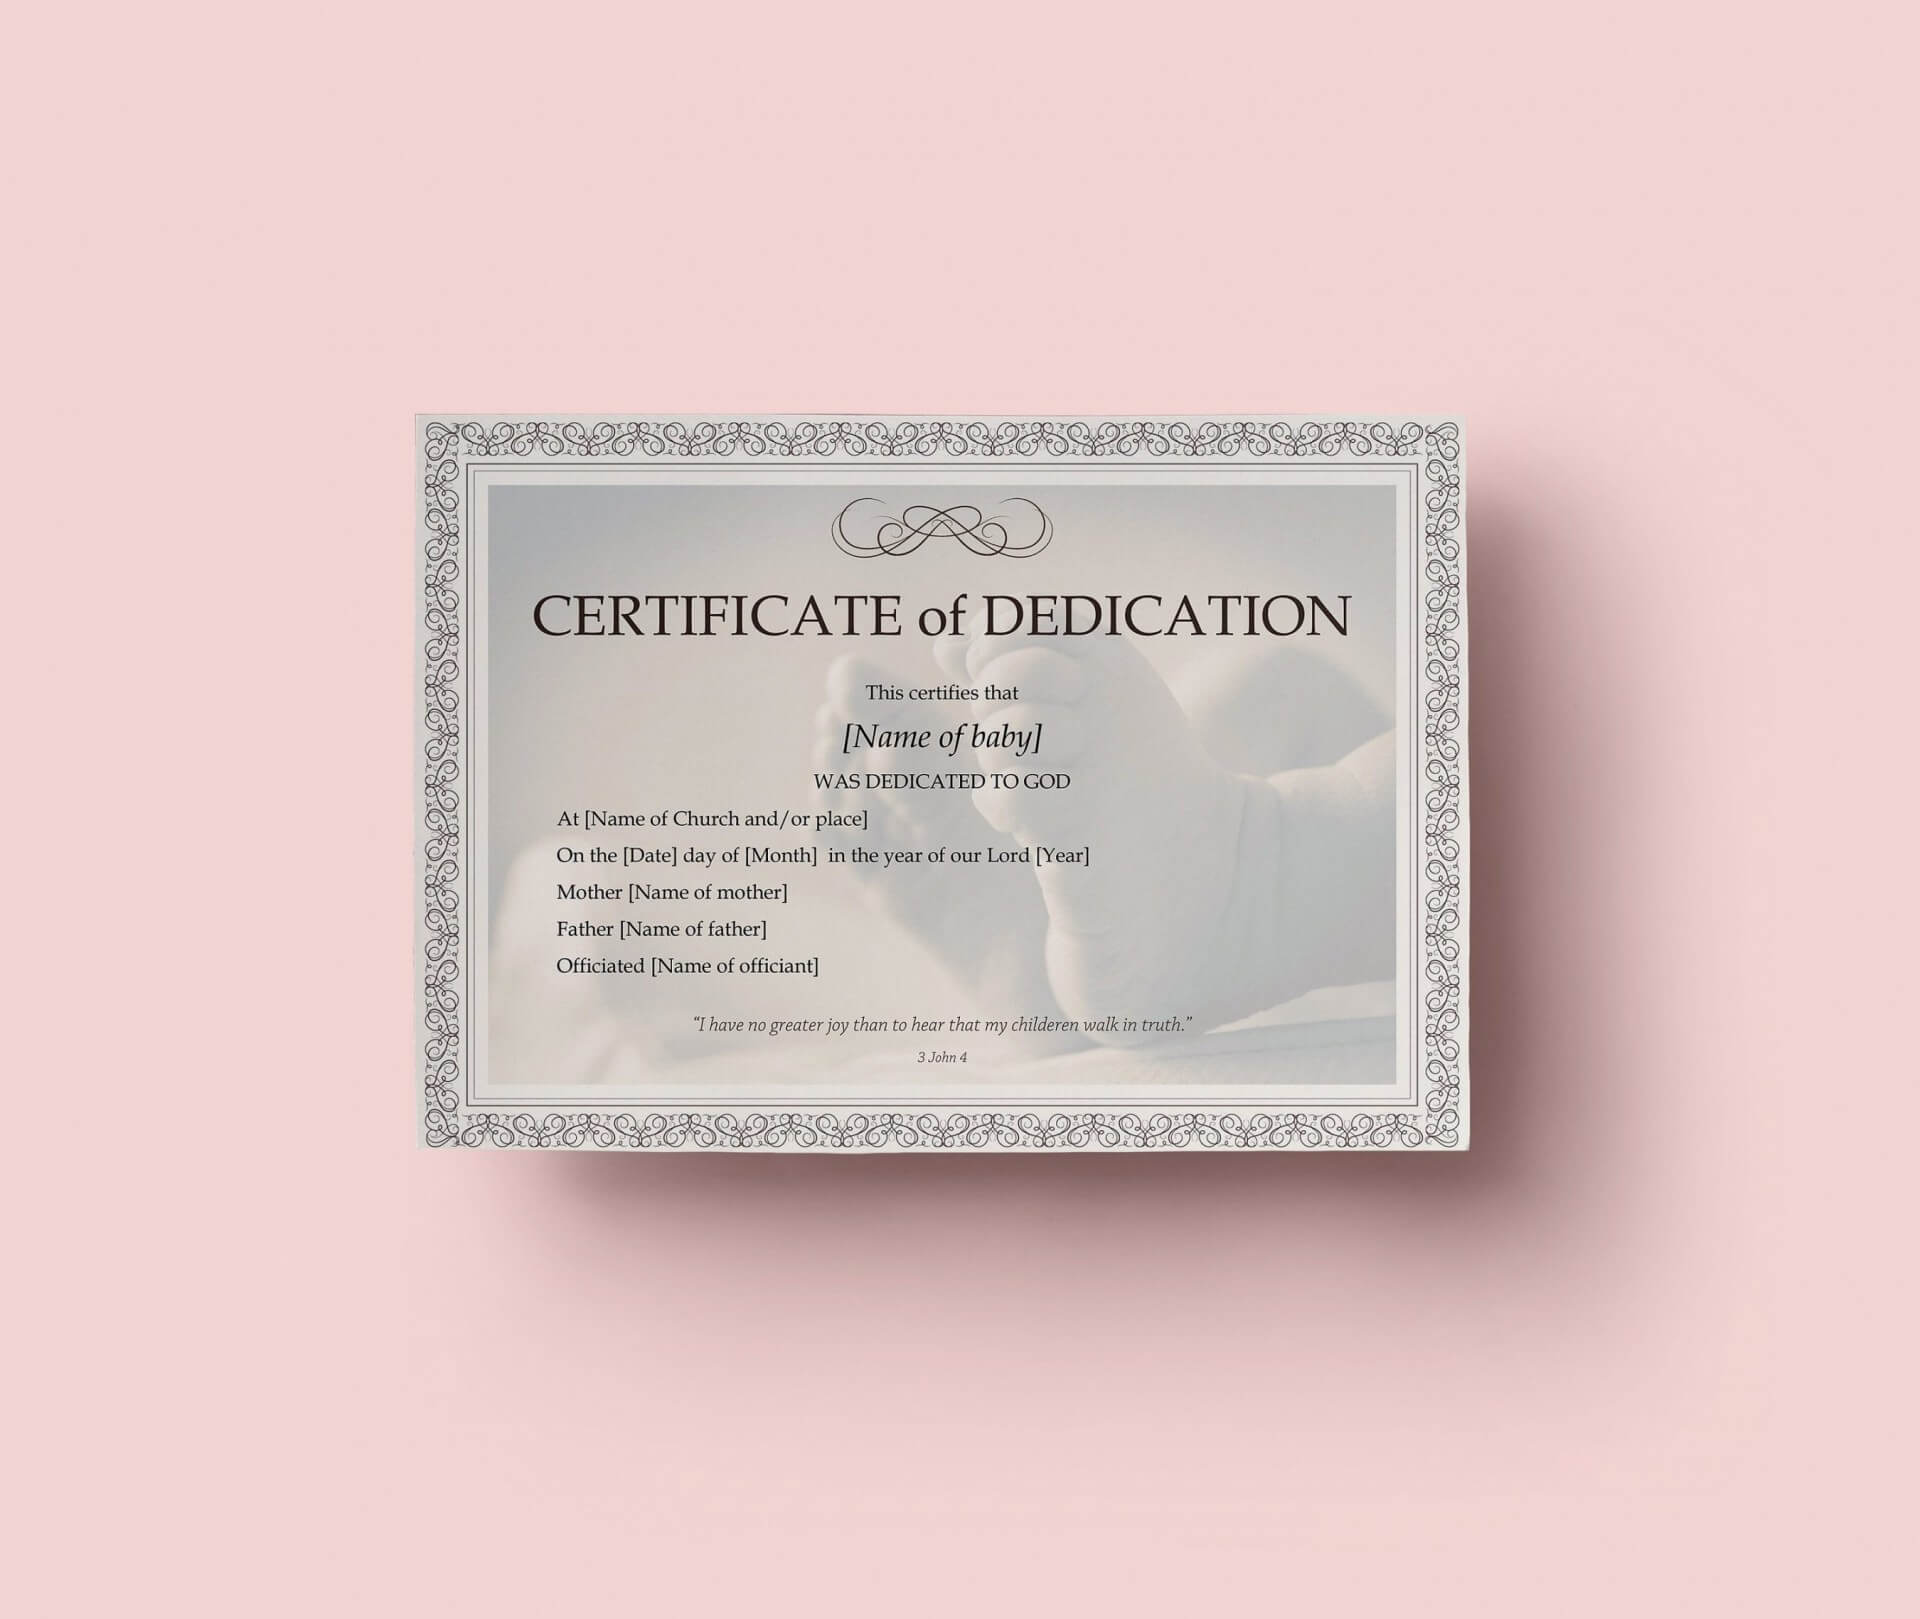 013 Appealing Official Birth Certificate Template Sample With Regard To Baby Dedication Certificate Template